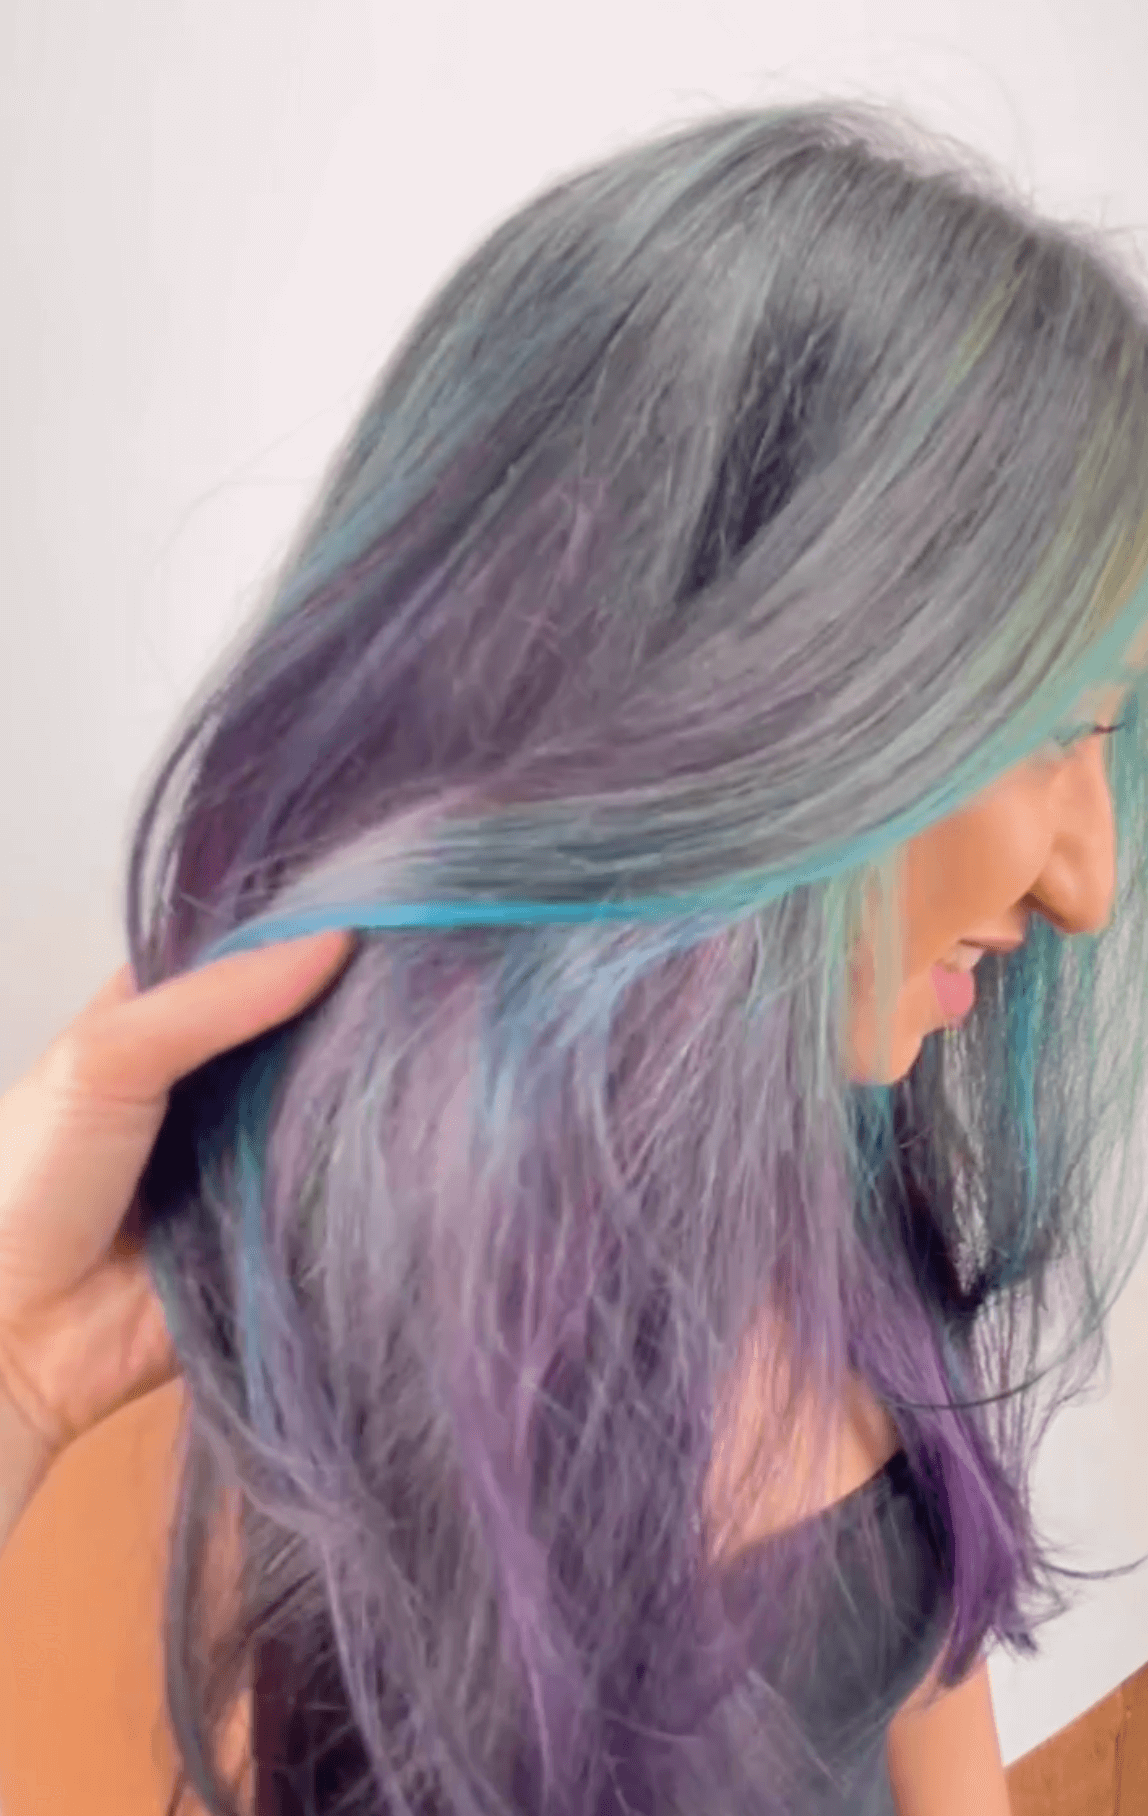 woman showing off grey, purple and blue hair